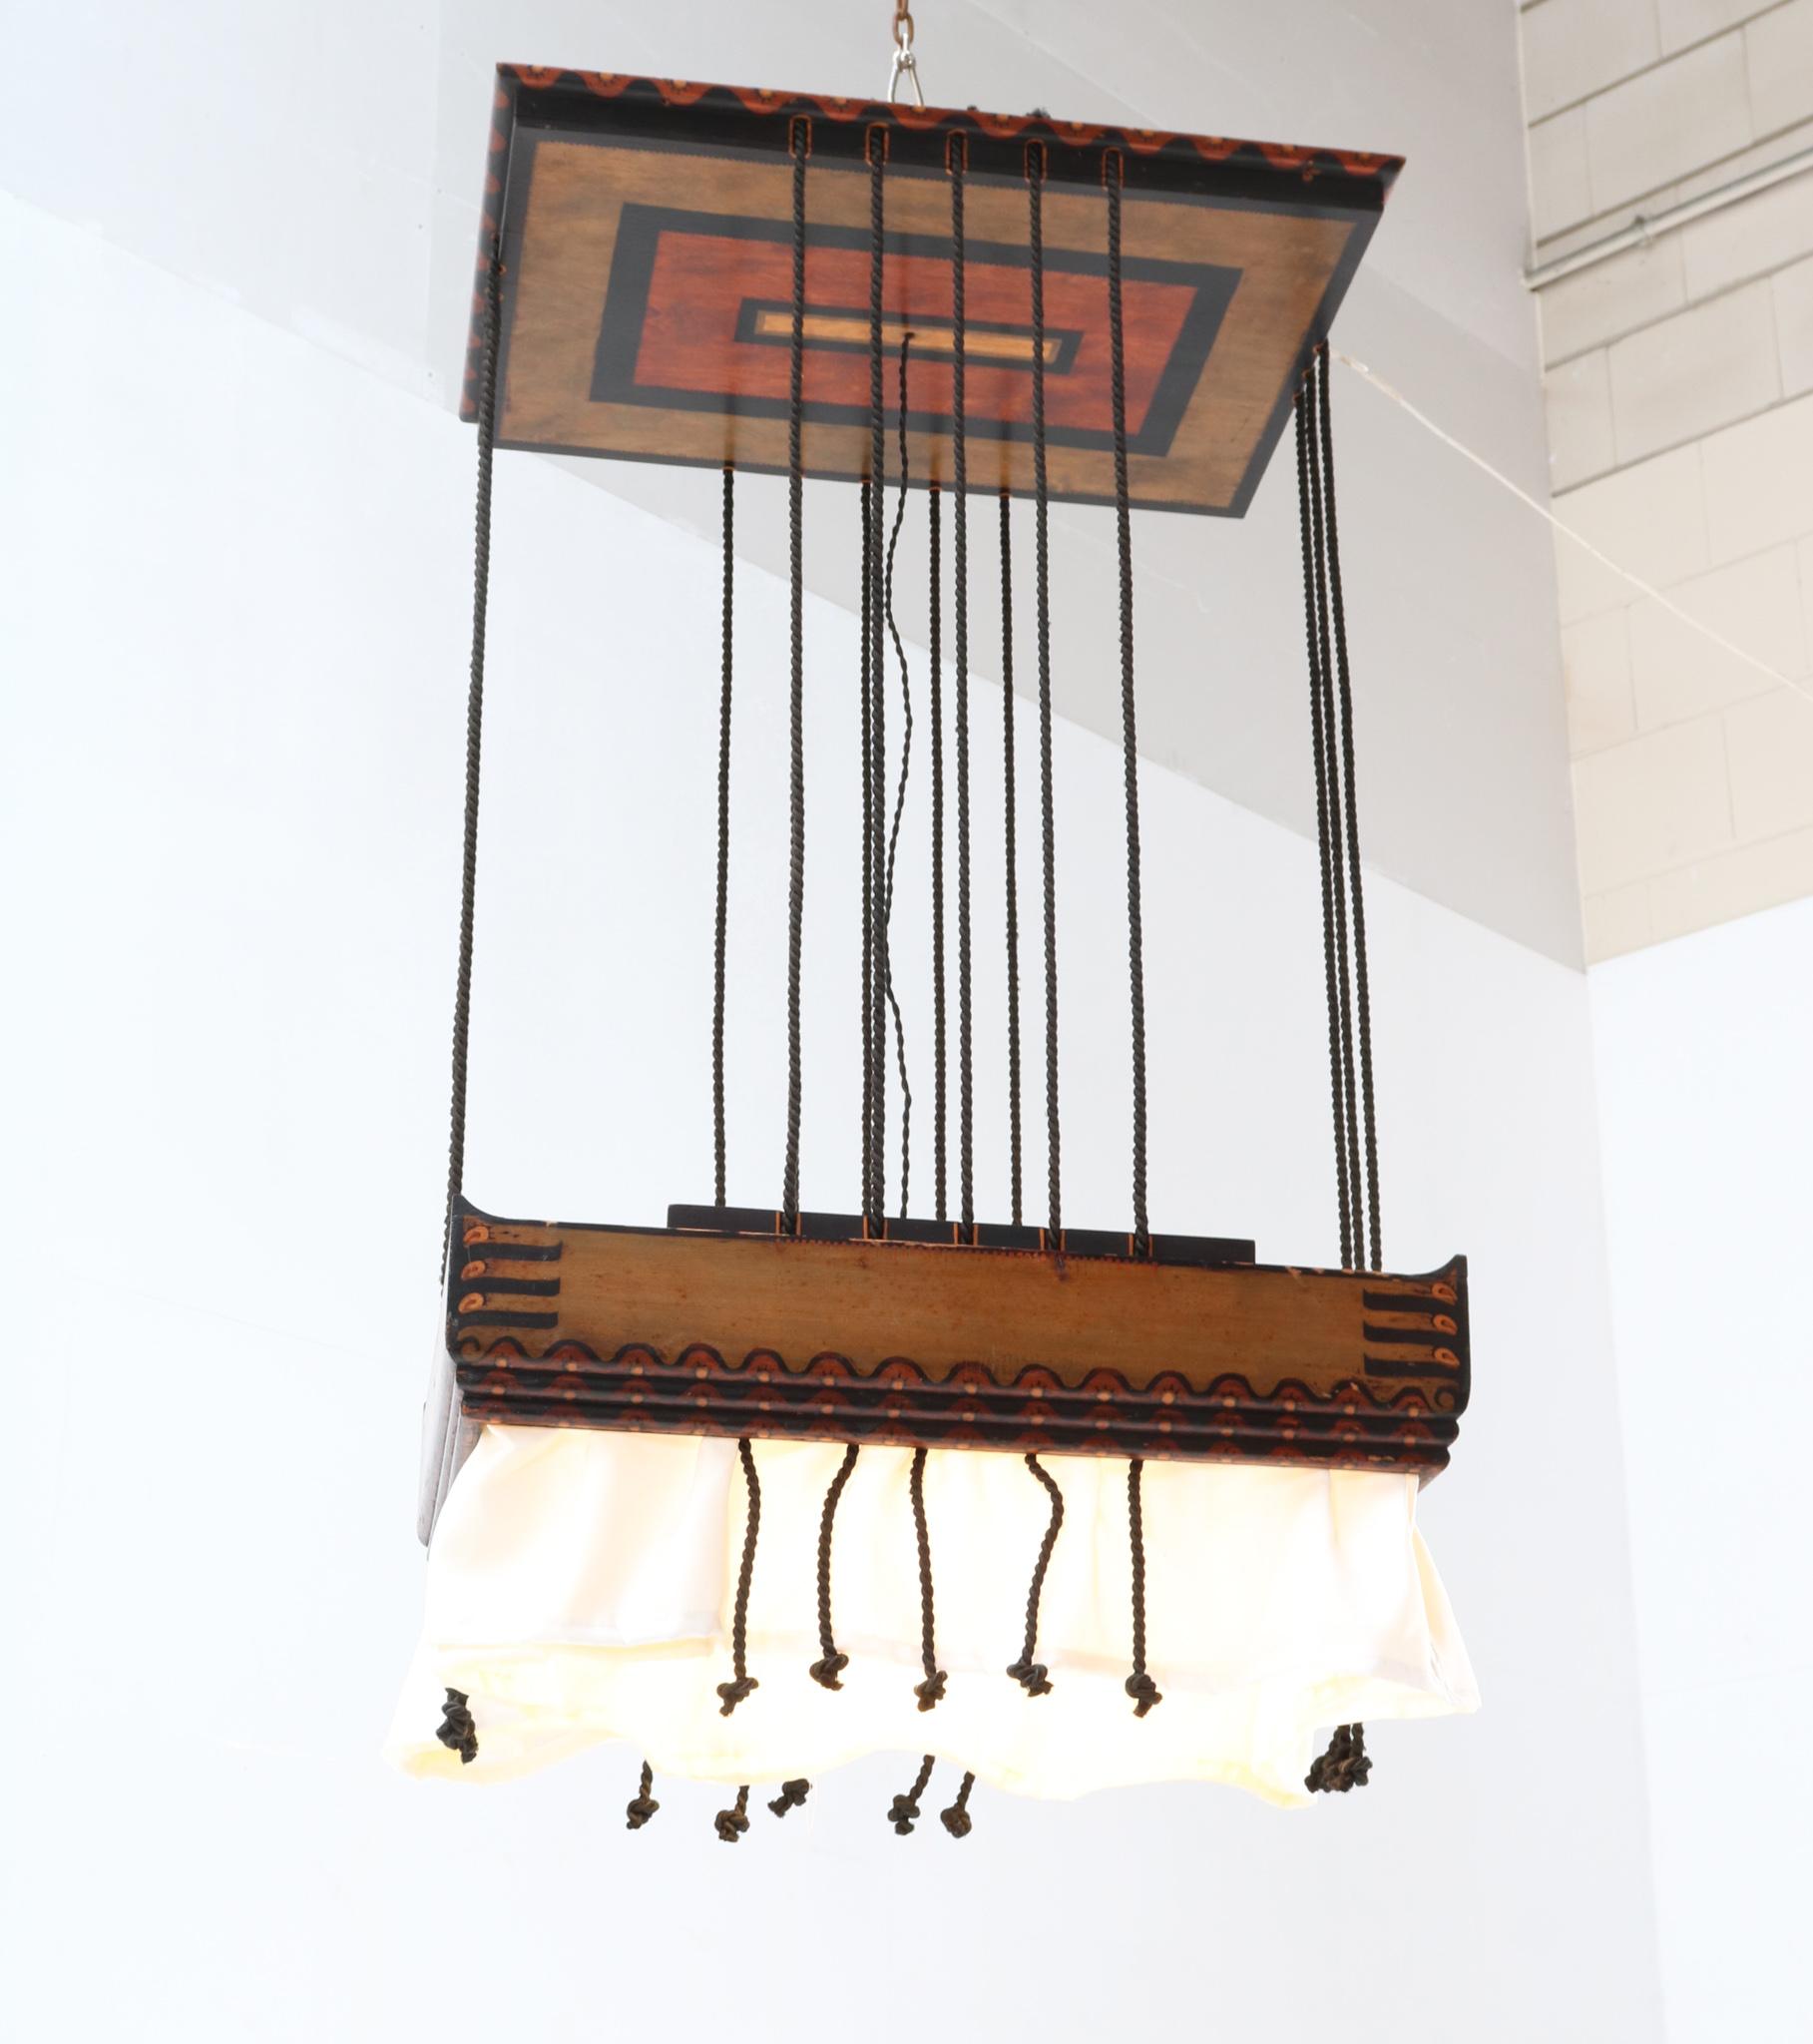 Magnificent and rare Art Deco Amsterdamse School chandelier.
Design by Louis Bogtman.
Striking Dutch design from the 1920s.
Original batik wooden frame with ceiling rose, silk shade and black lacquered cords.
Rewired with one original socket for